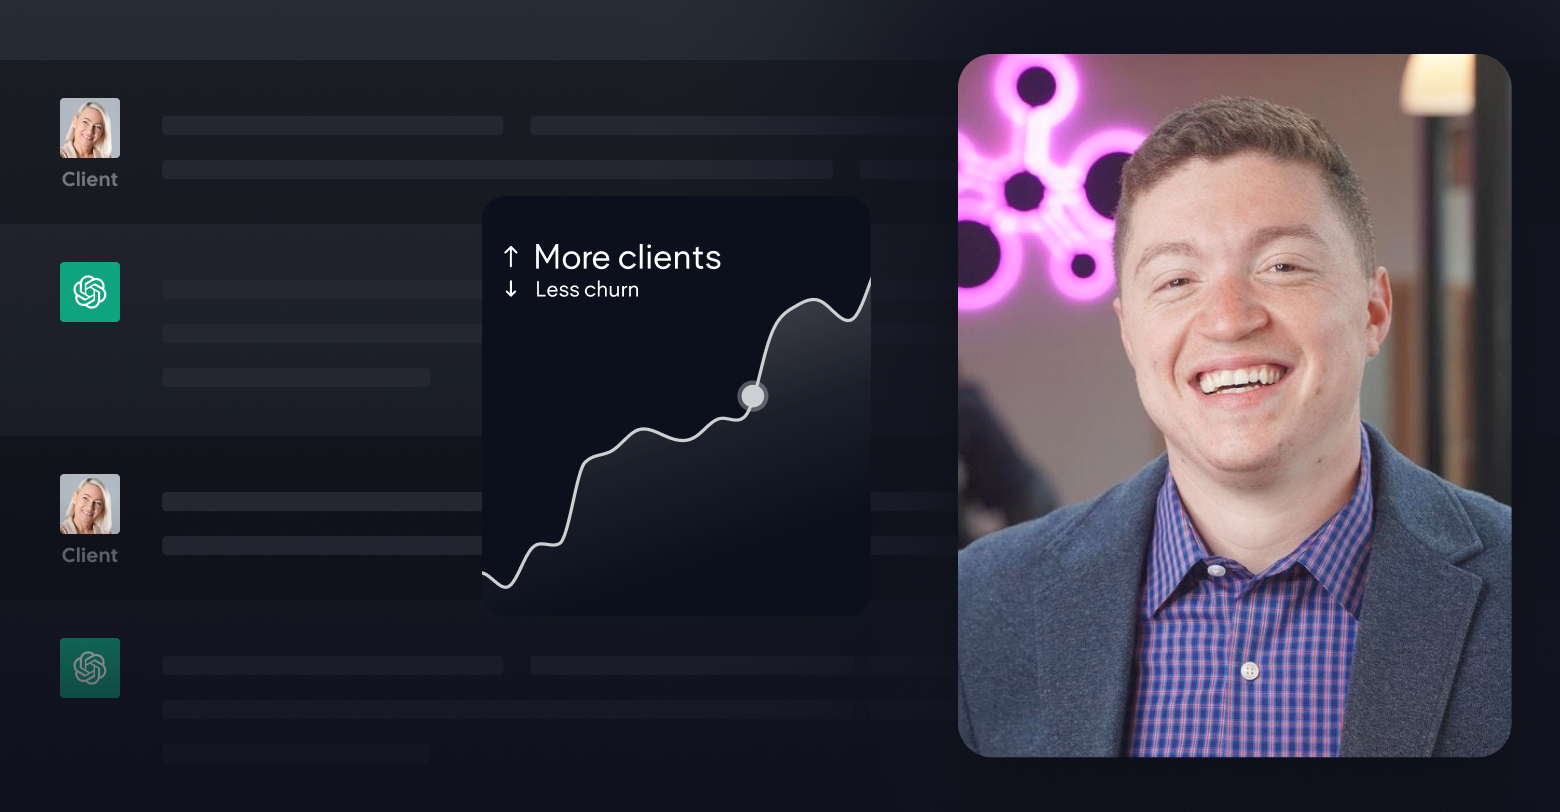 A man is smiling in front of an AI chatbot image and a growth graph with more clients and less churn